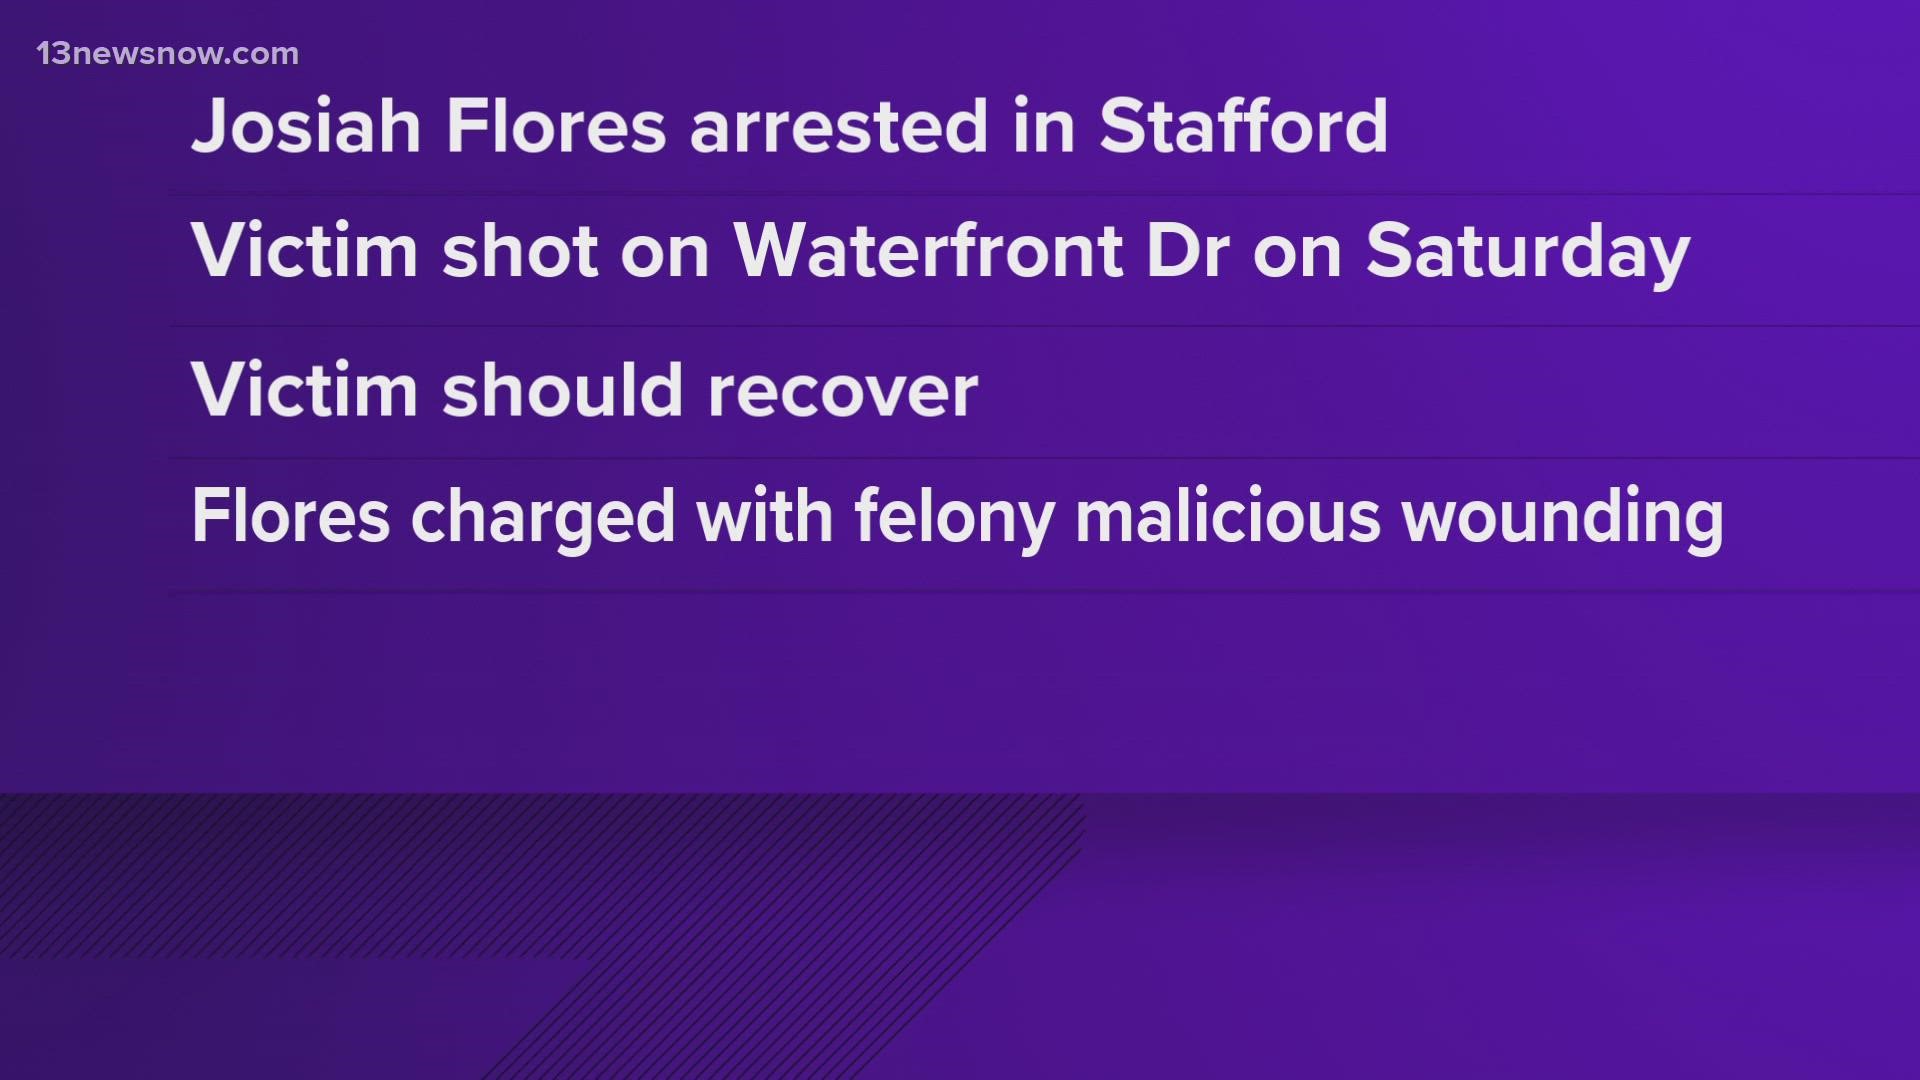 Authorities in Stafford arrested Josiah Tanoah Flores for a shooting that left one person hurt off Waterfront Drive on Dec. 17.